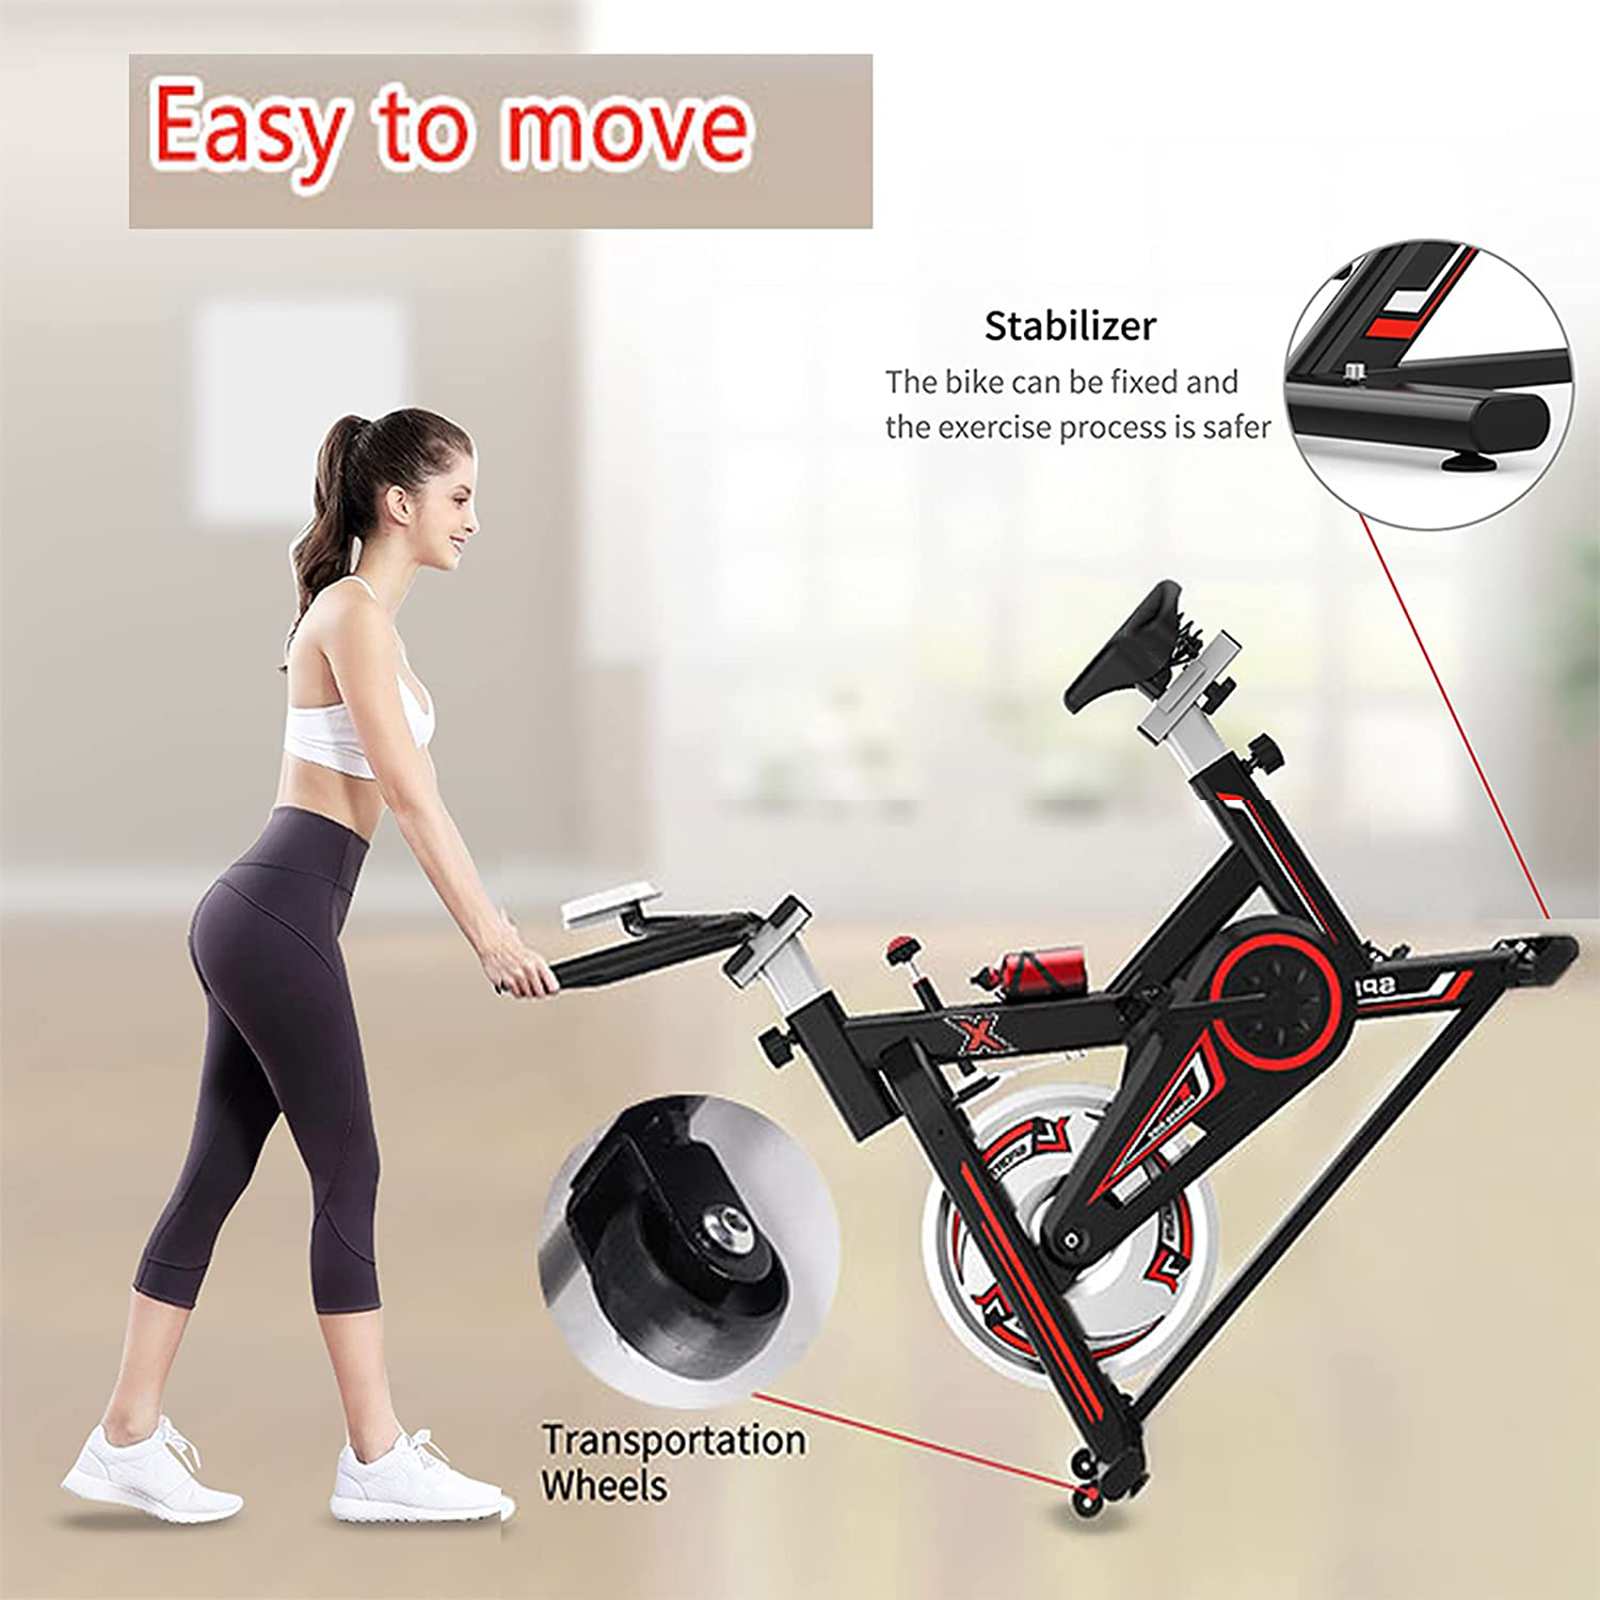 SKONYON Exercise Bike Stationary Indoor Cycling Bike Heavy Duty Flywheel Bicycle for Home Cardio Workout - image 4 of 9